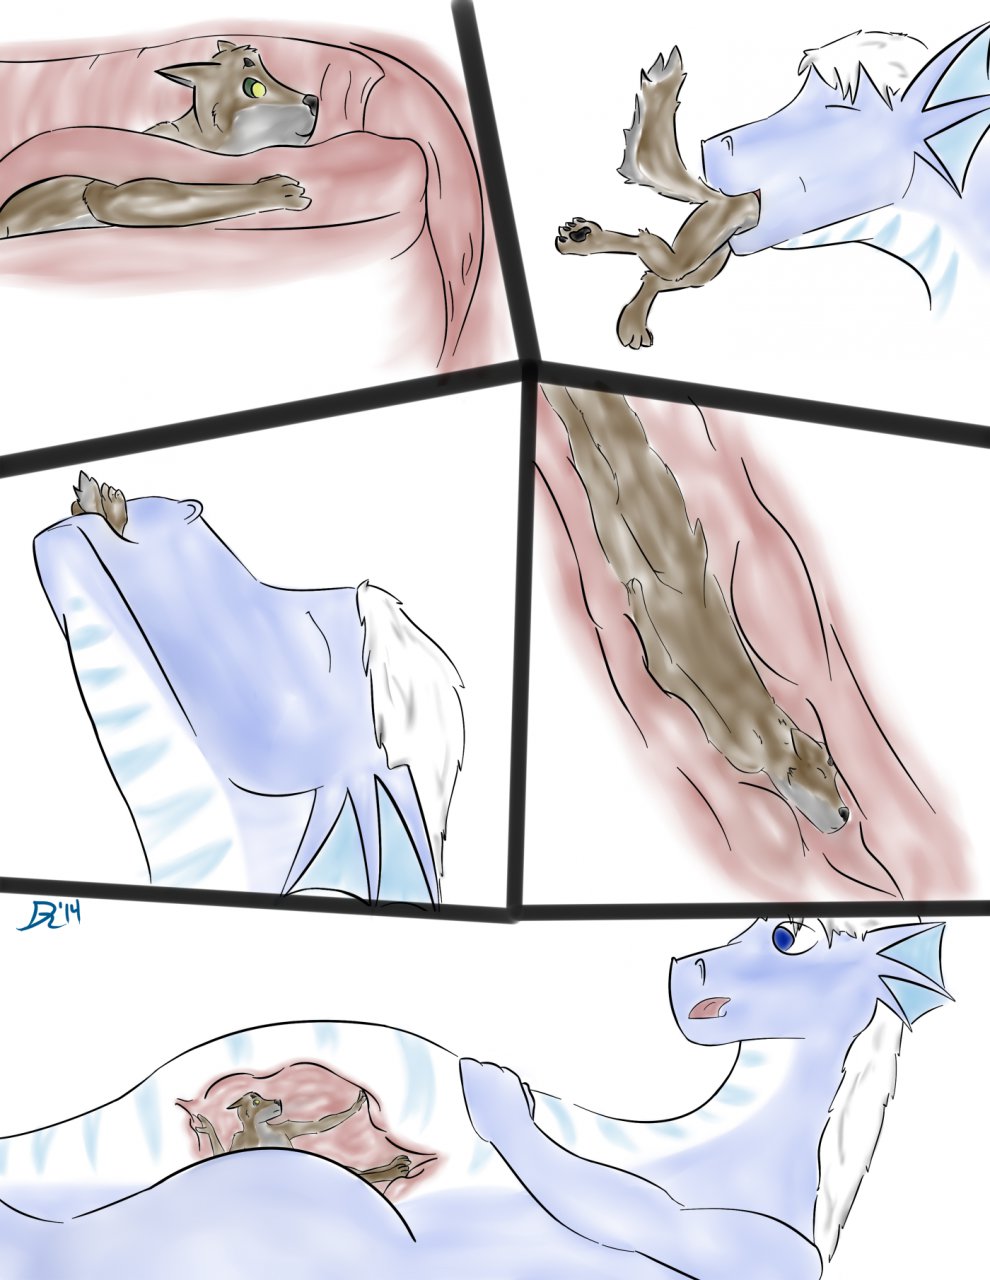 Yeavy Vore Comic P.2 by. 